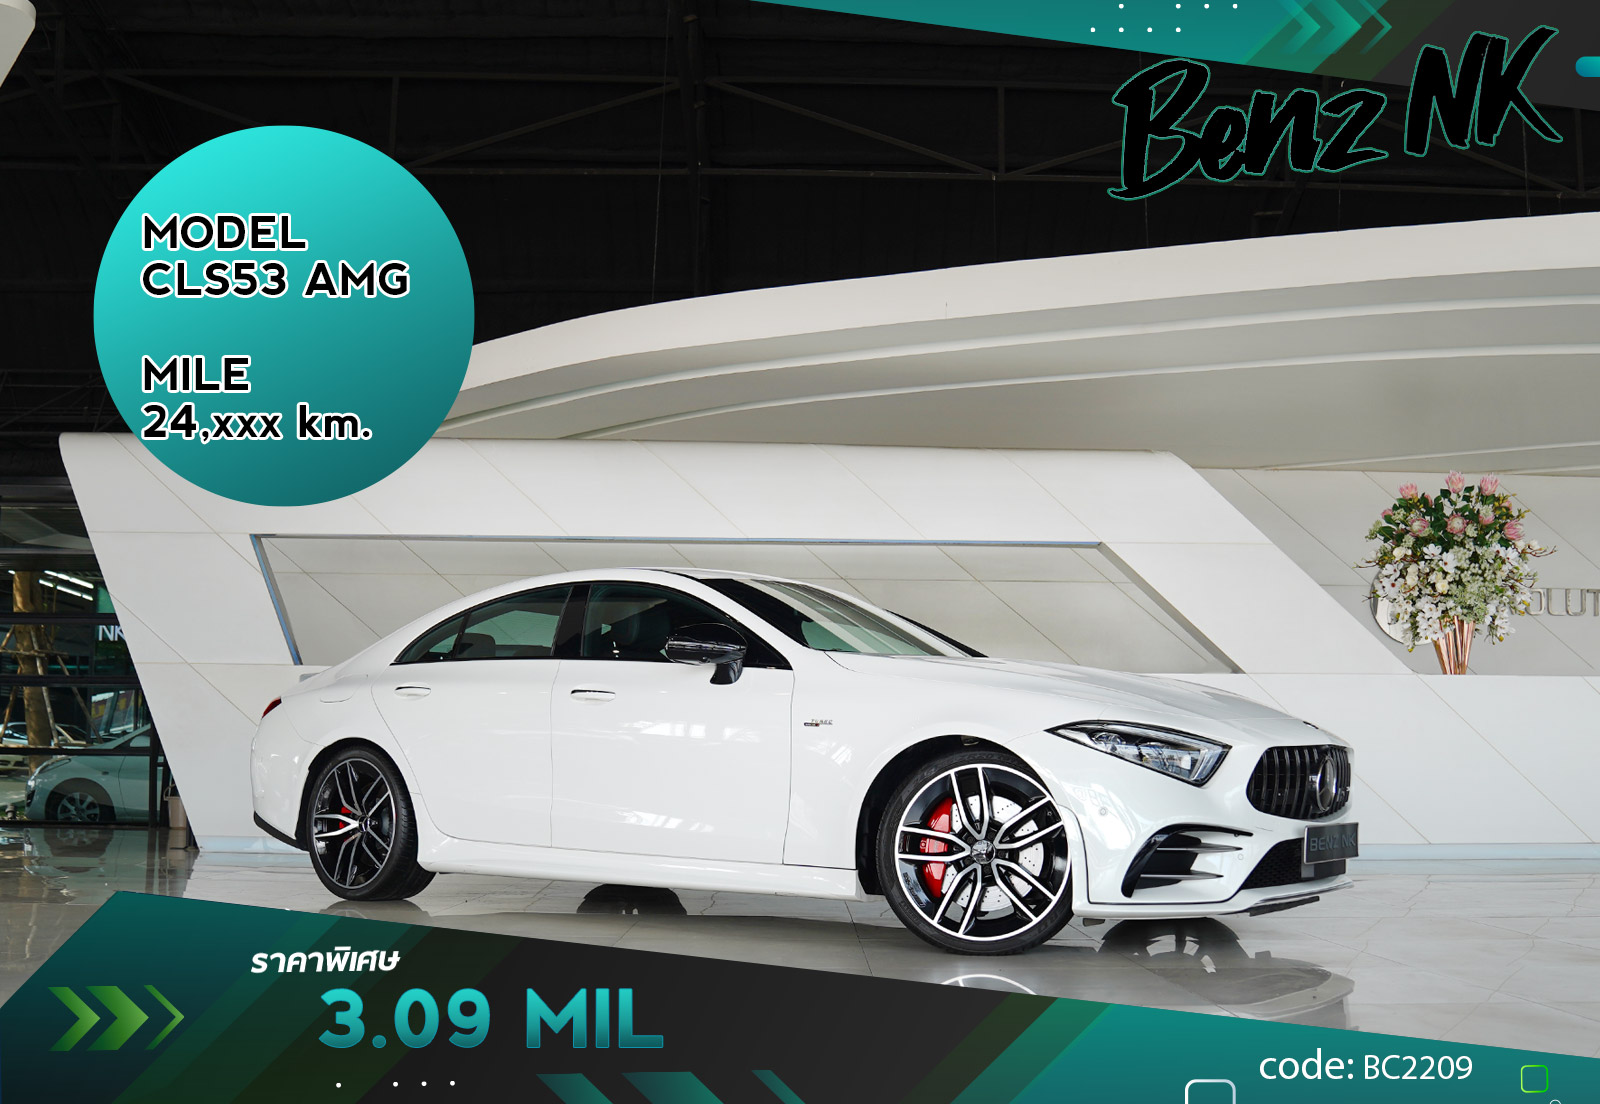 New CLS53 AMG